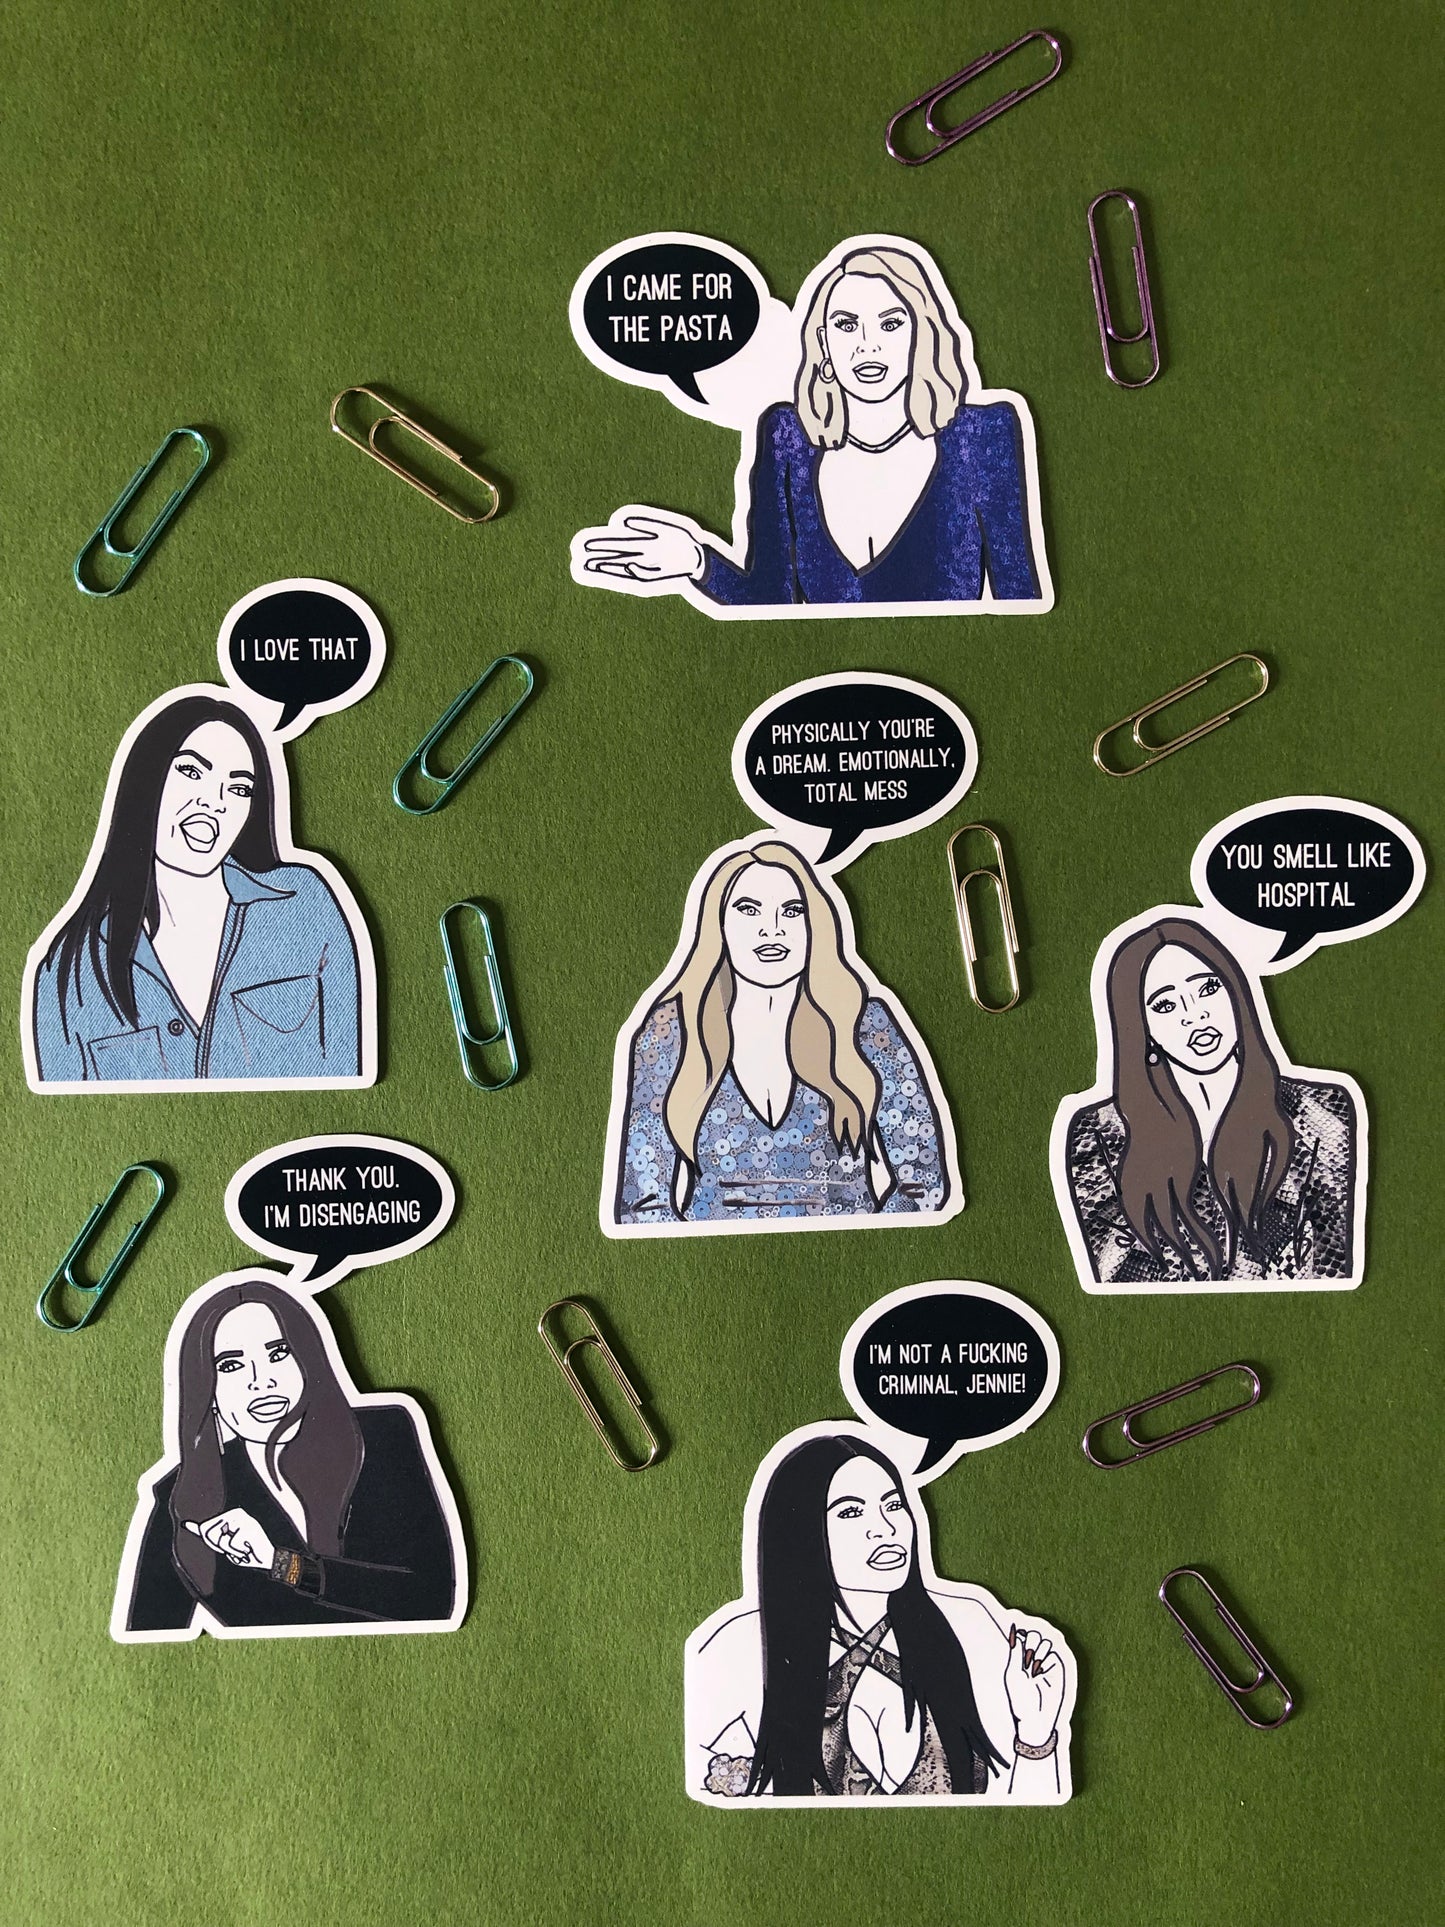 Real Housewives of Salt Lake City inspired Sticker Set